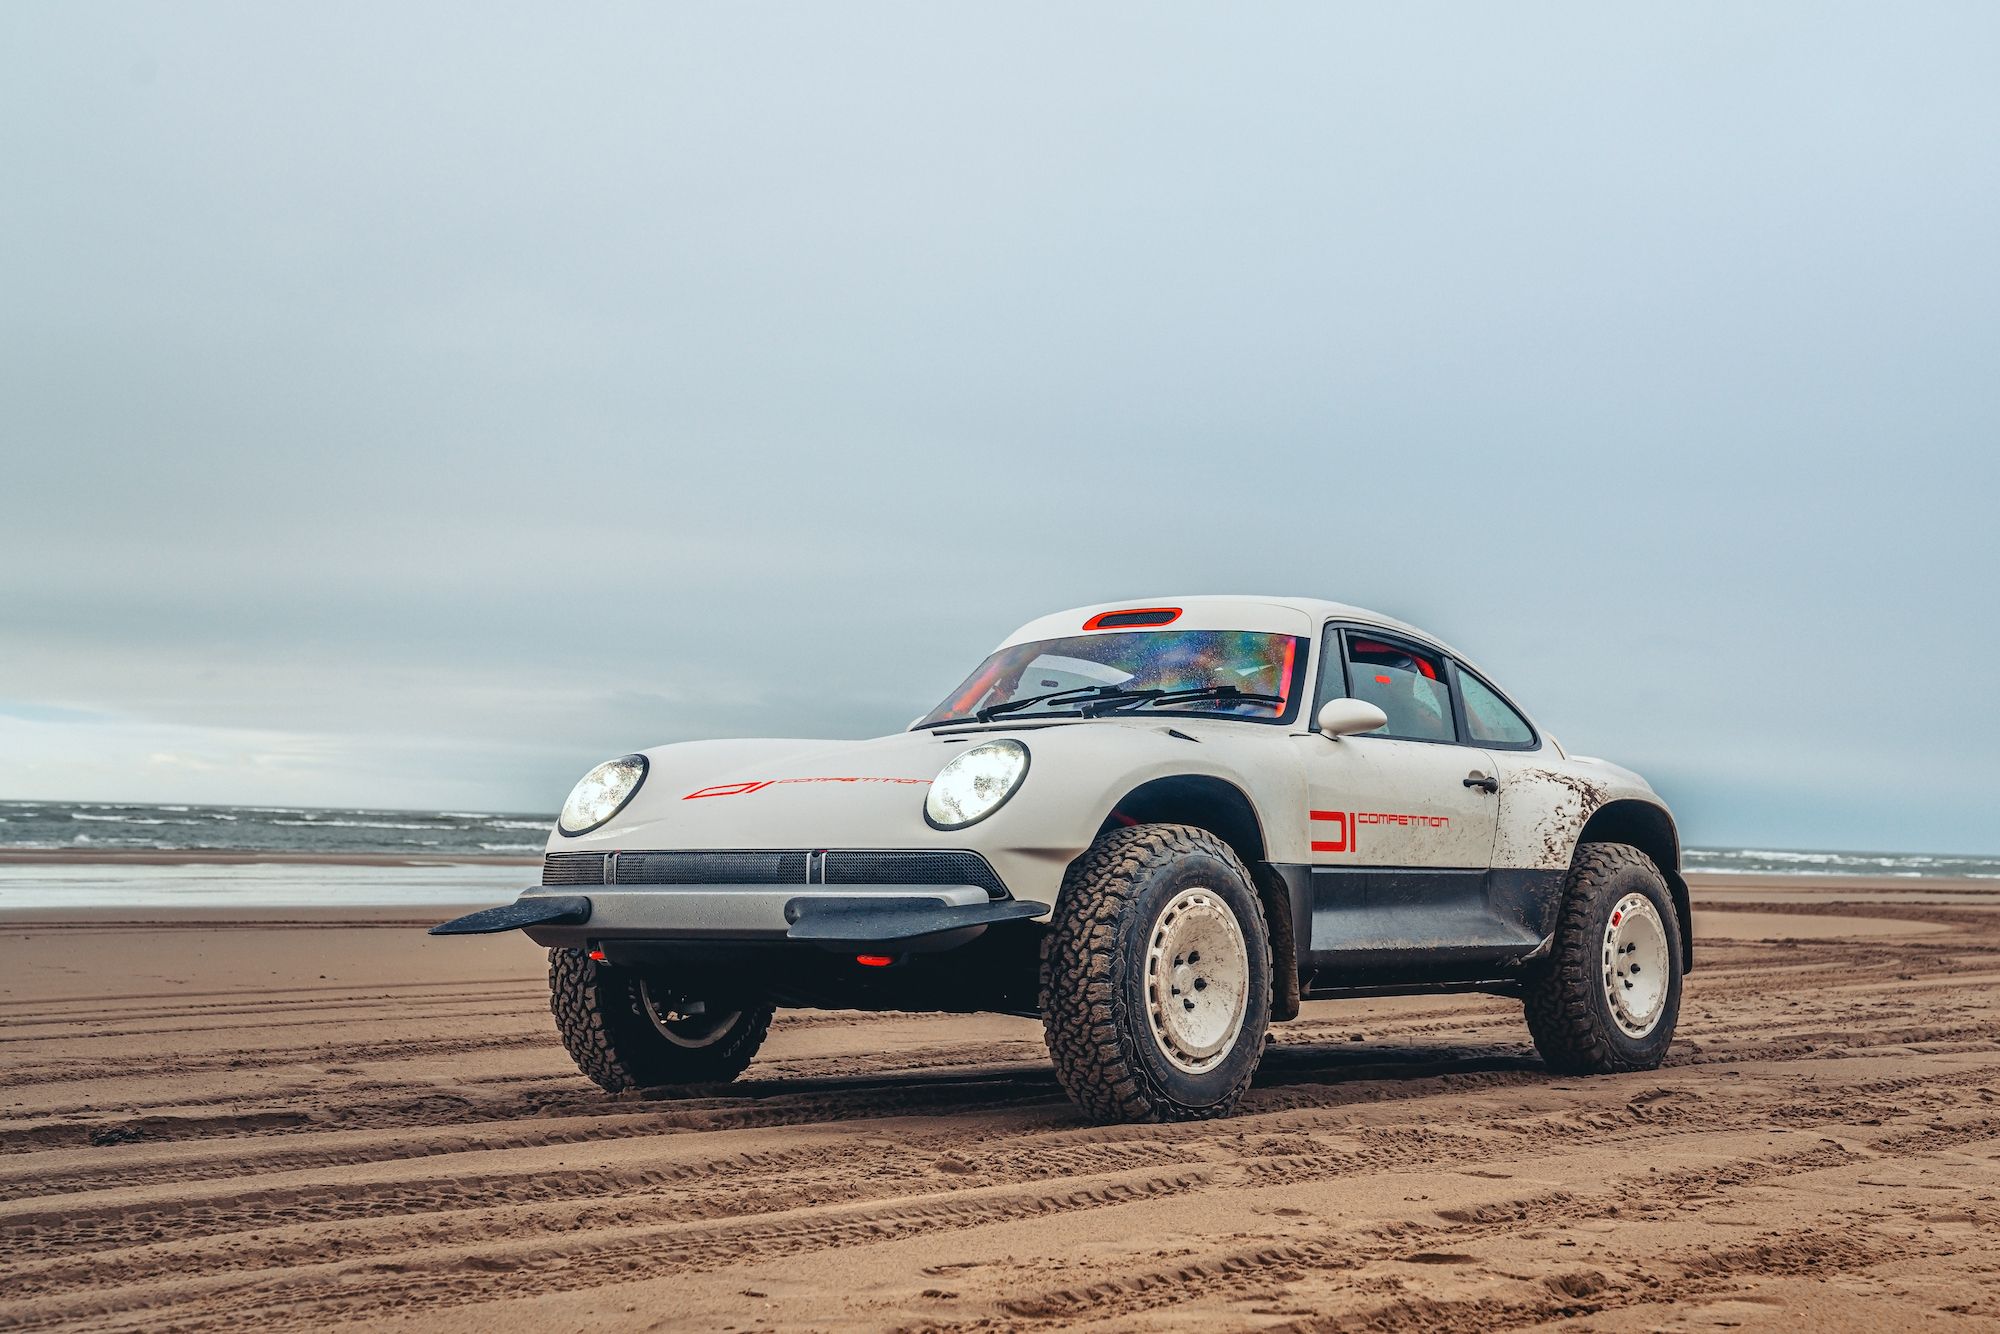 Latest Porsche 911 From Singer Is a Baja-Ready Twin-Turbo Monster